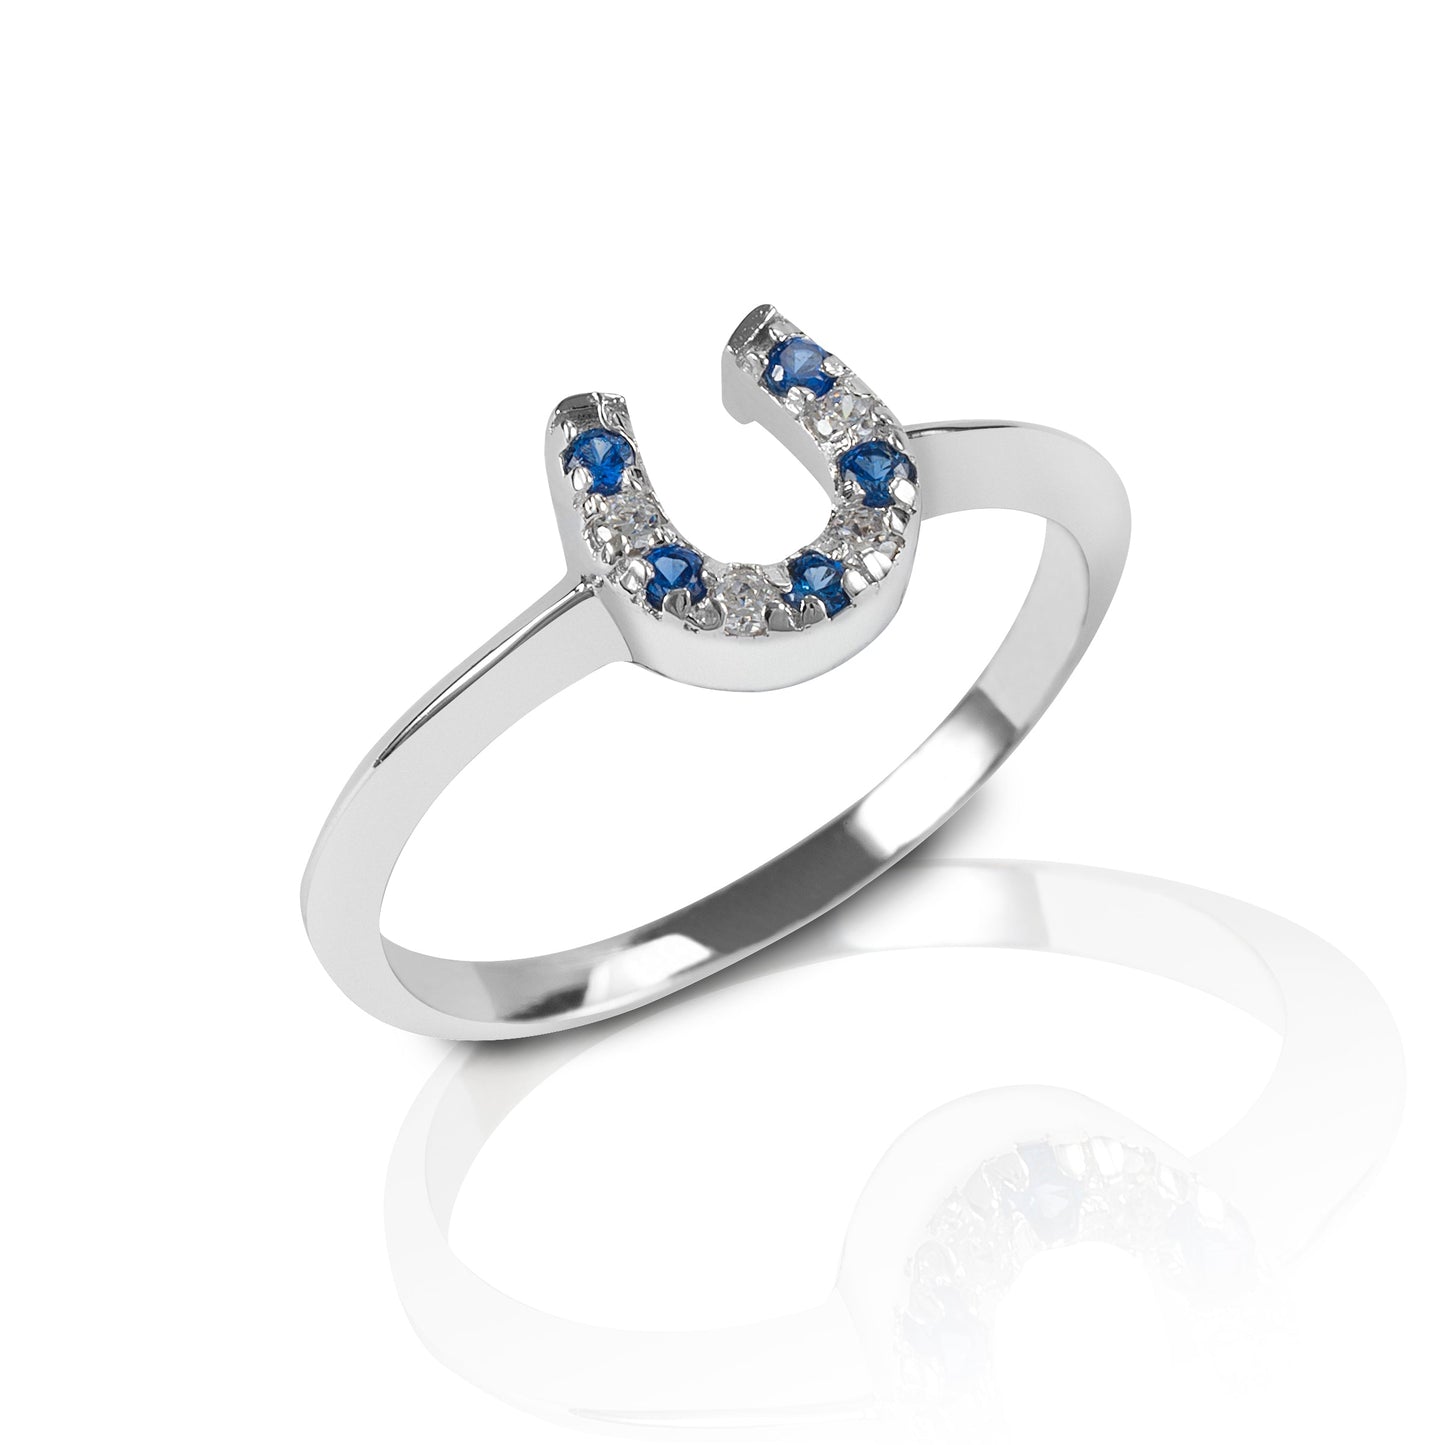 Kelly Herd horseshoe ring with blue stones and silver finish.